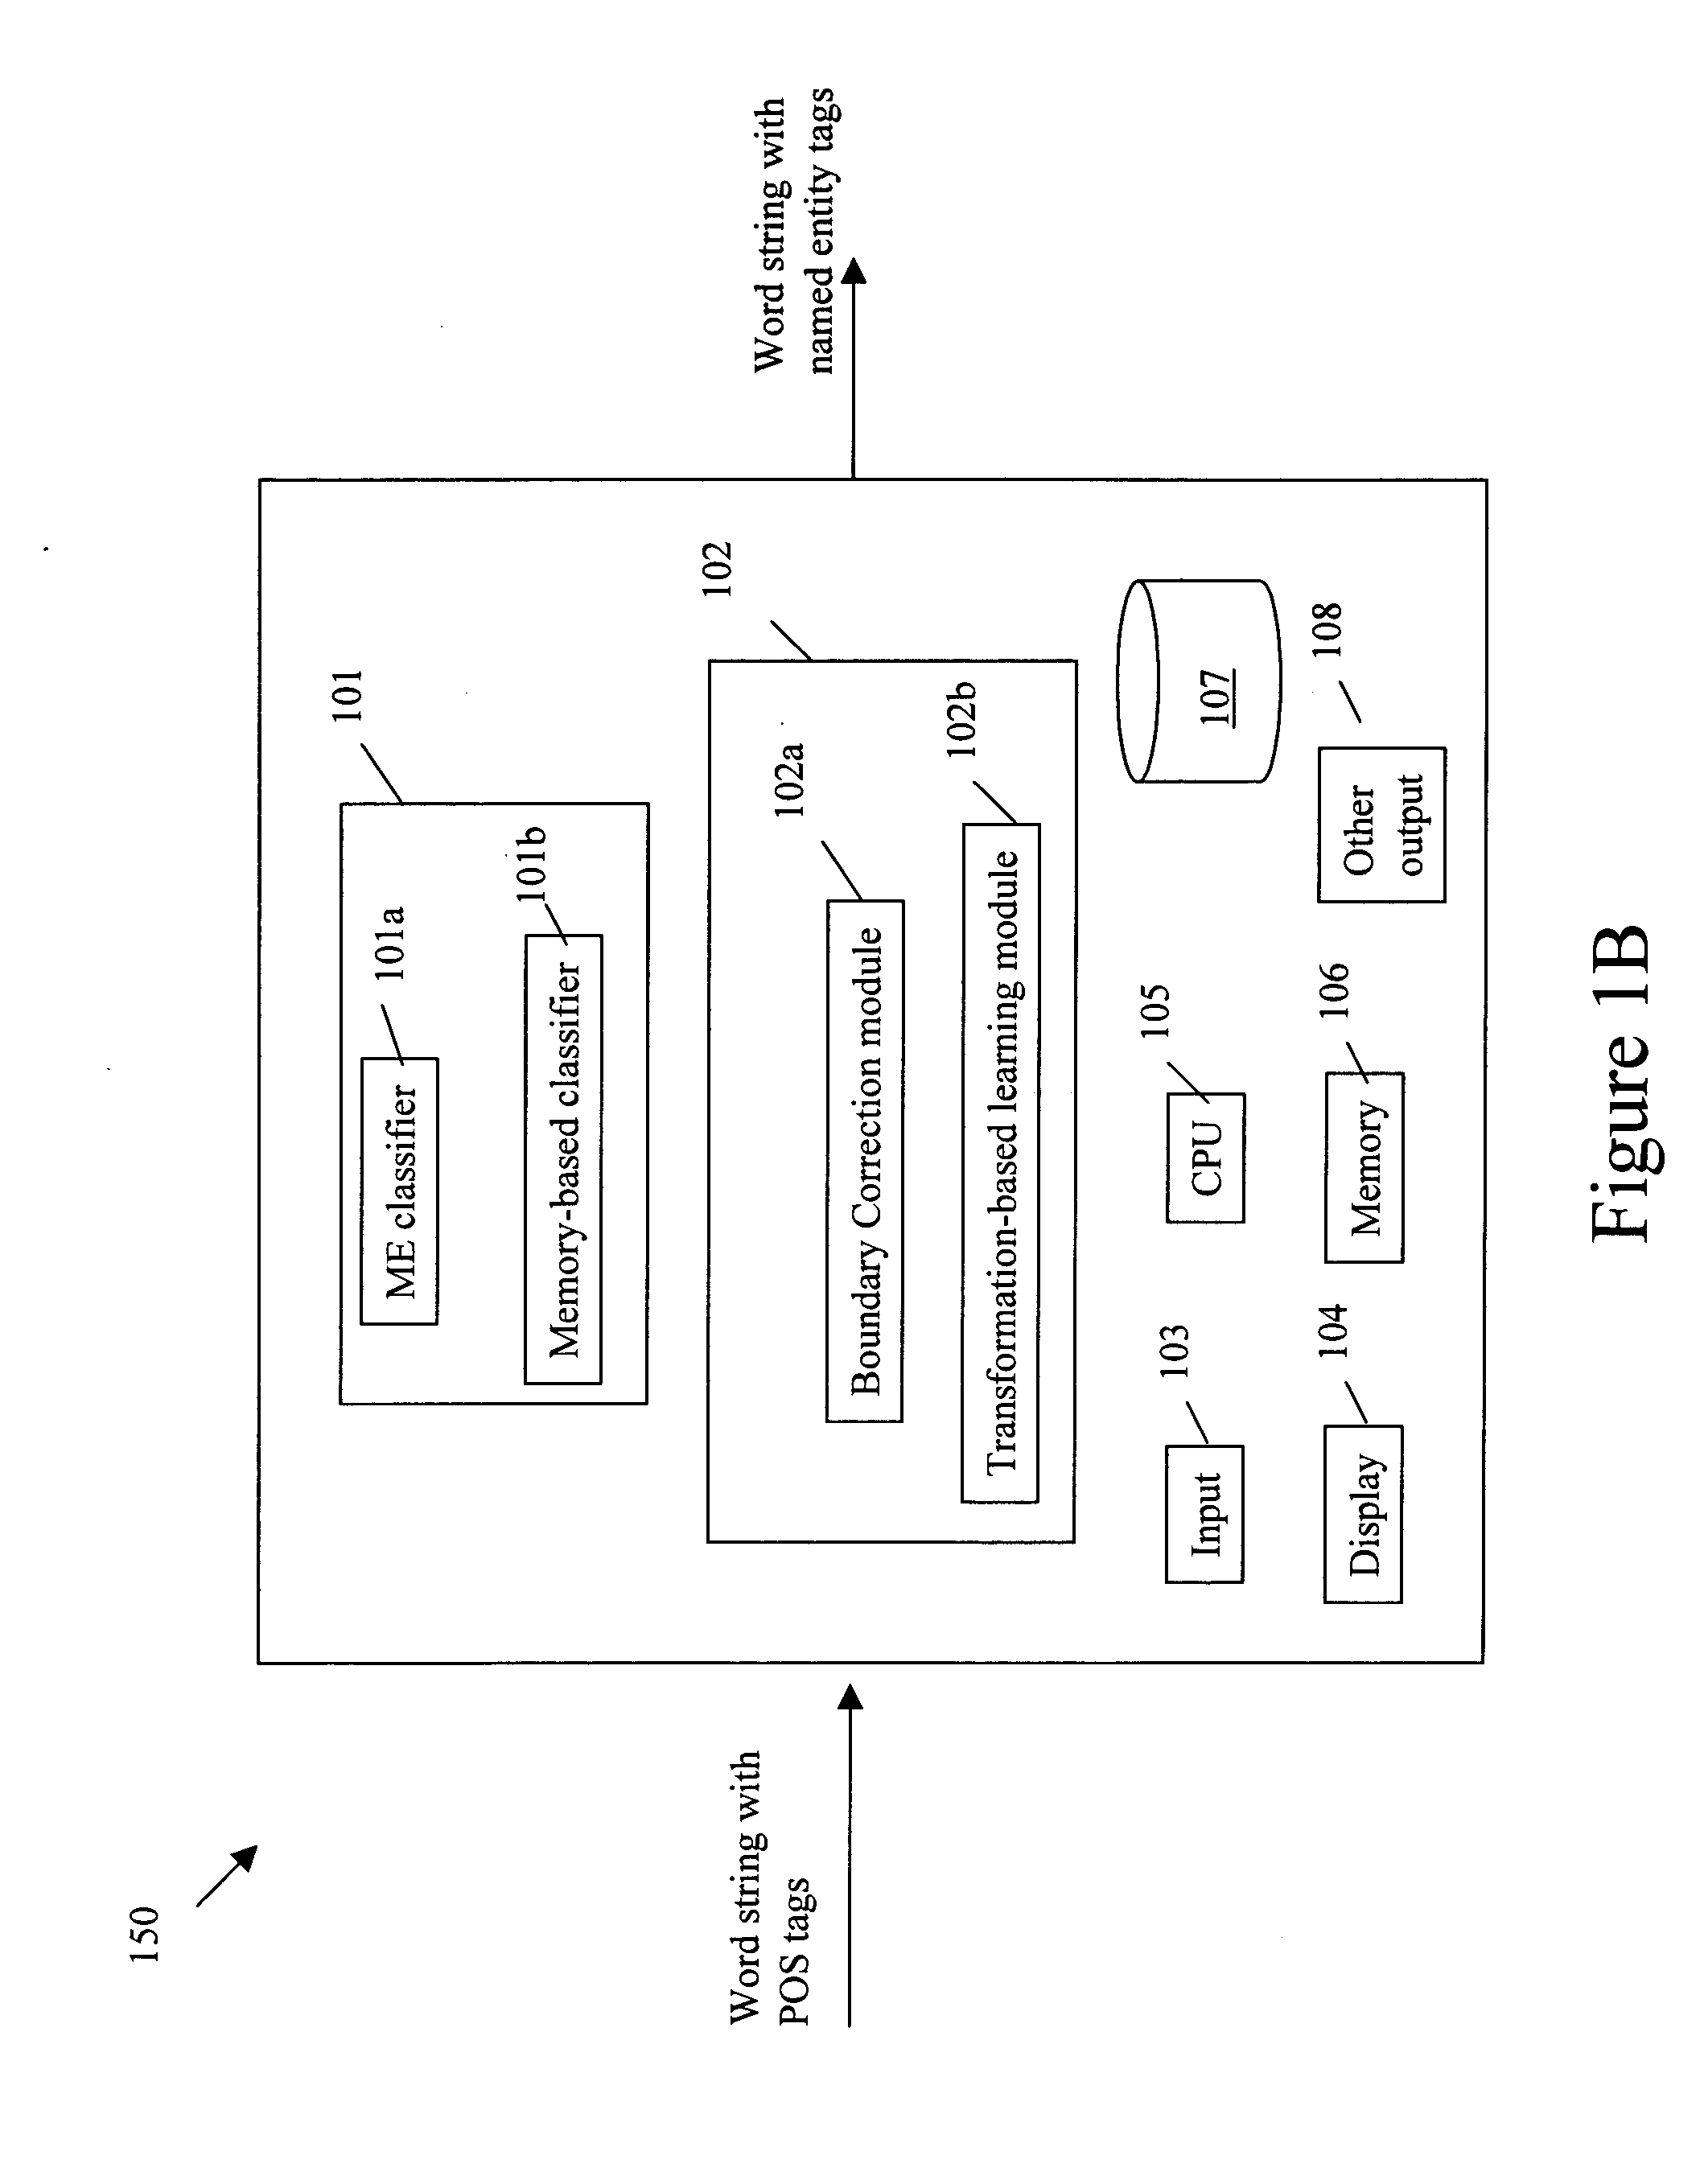 Method and apparatus for providing proper or partial proper name recognition